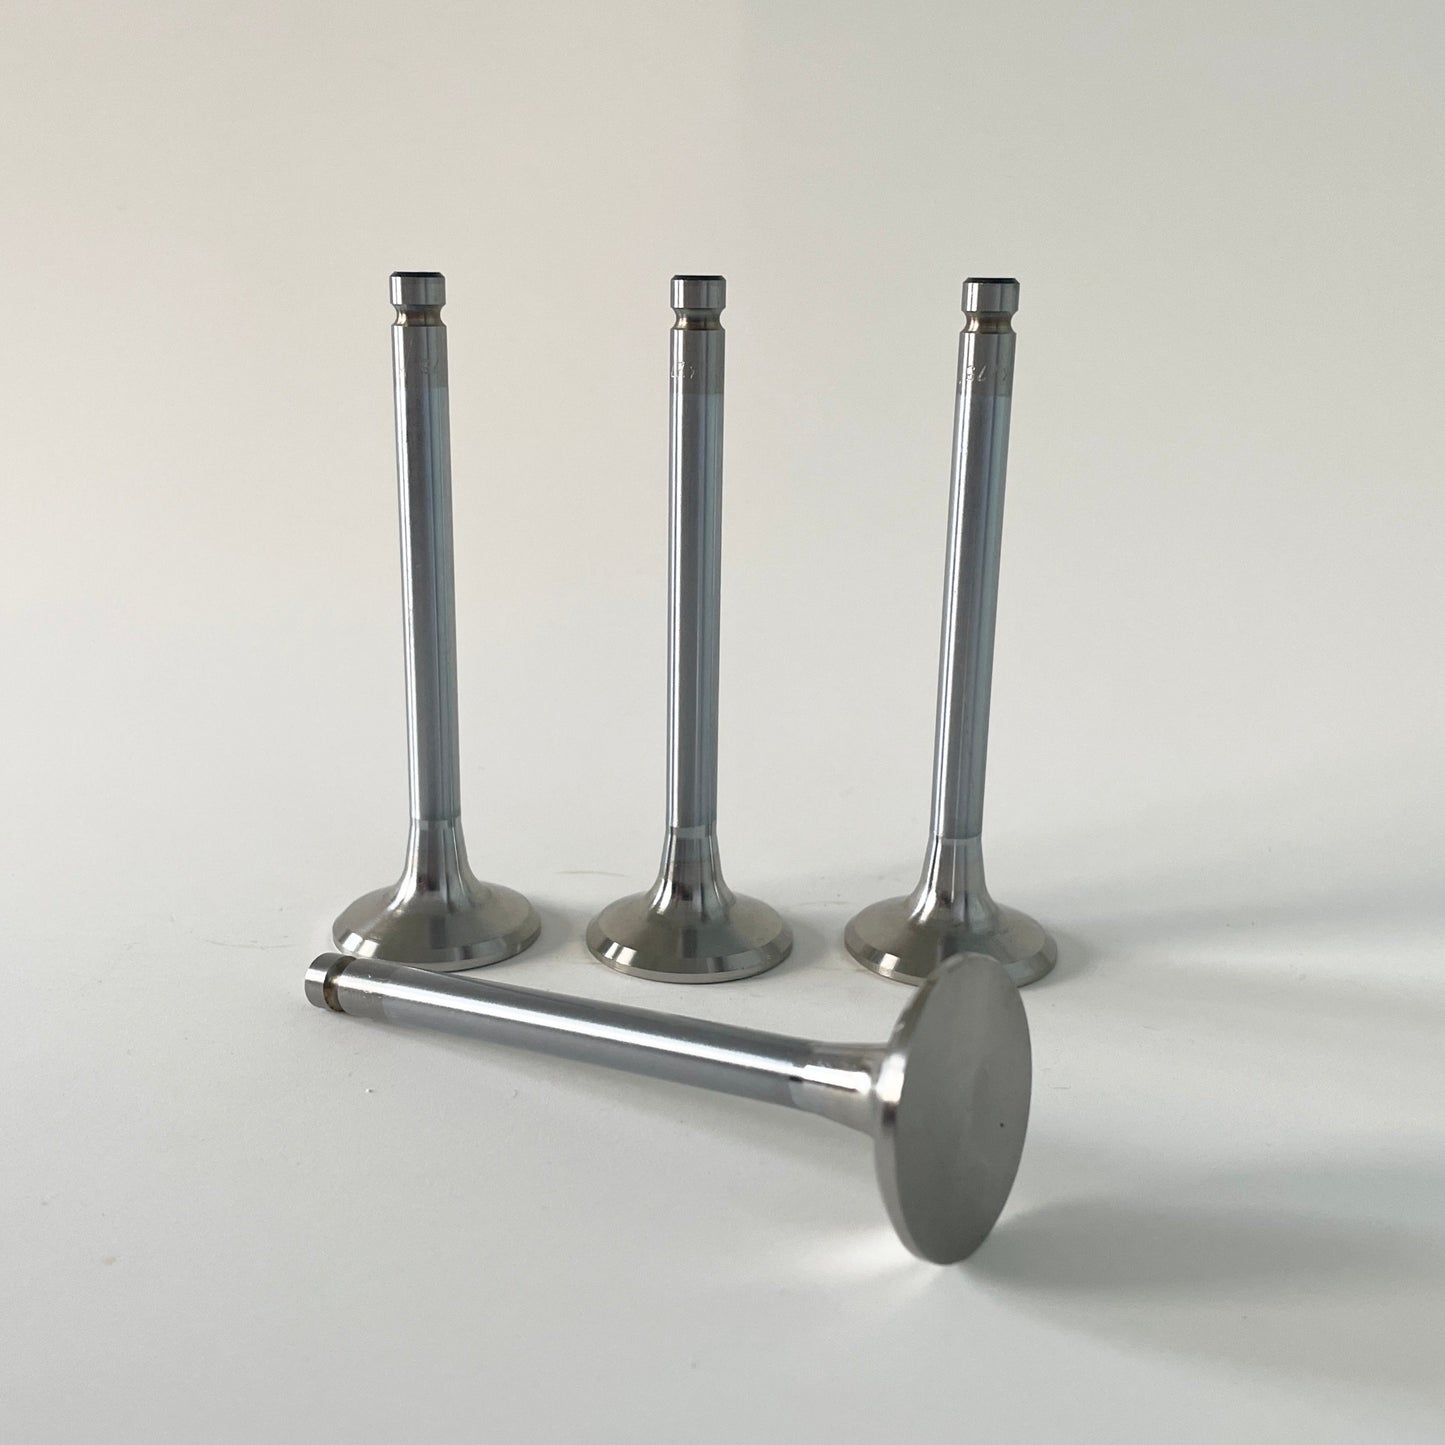 1275 Intake/Exhaust Valves (Stainless Steel)(Sold Individually)